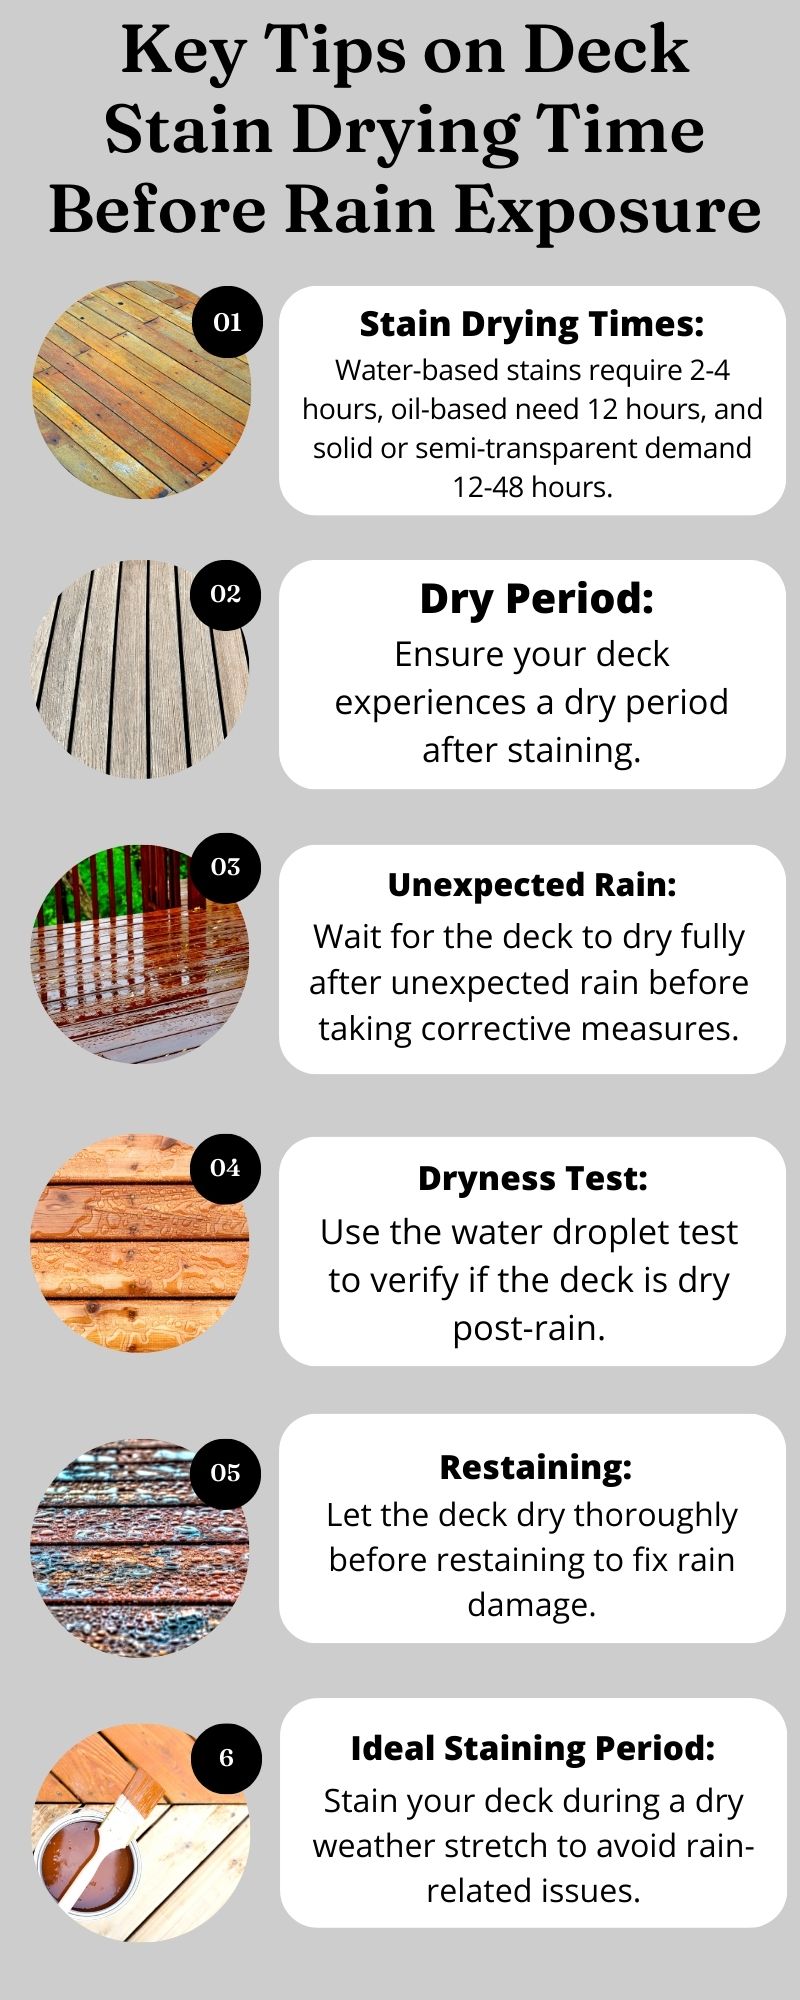 Key Tips on Deck Stain Drying Time Before Rain Exposure